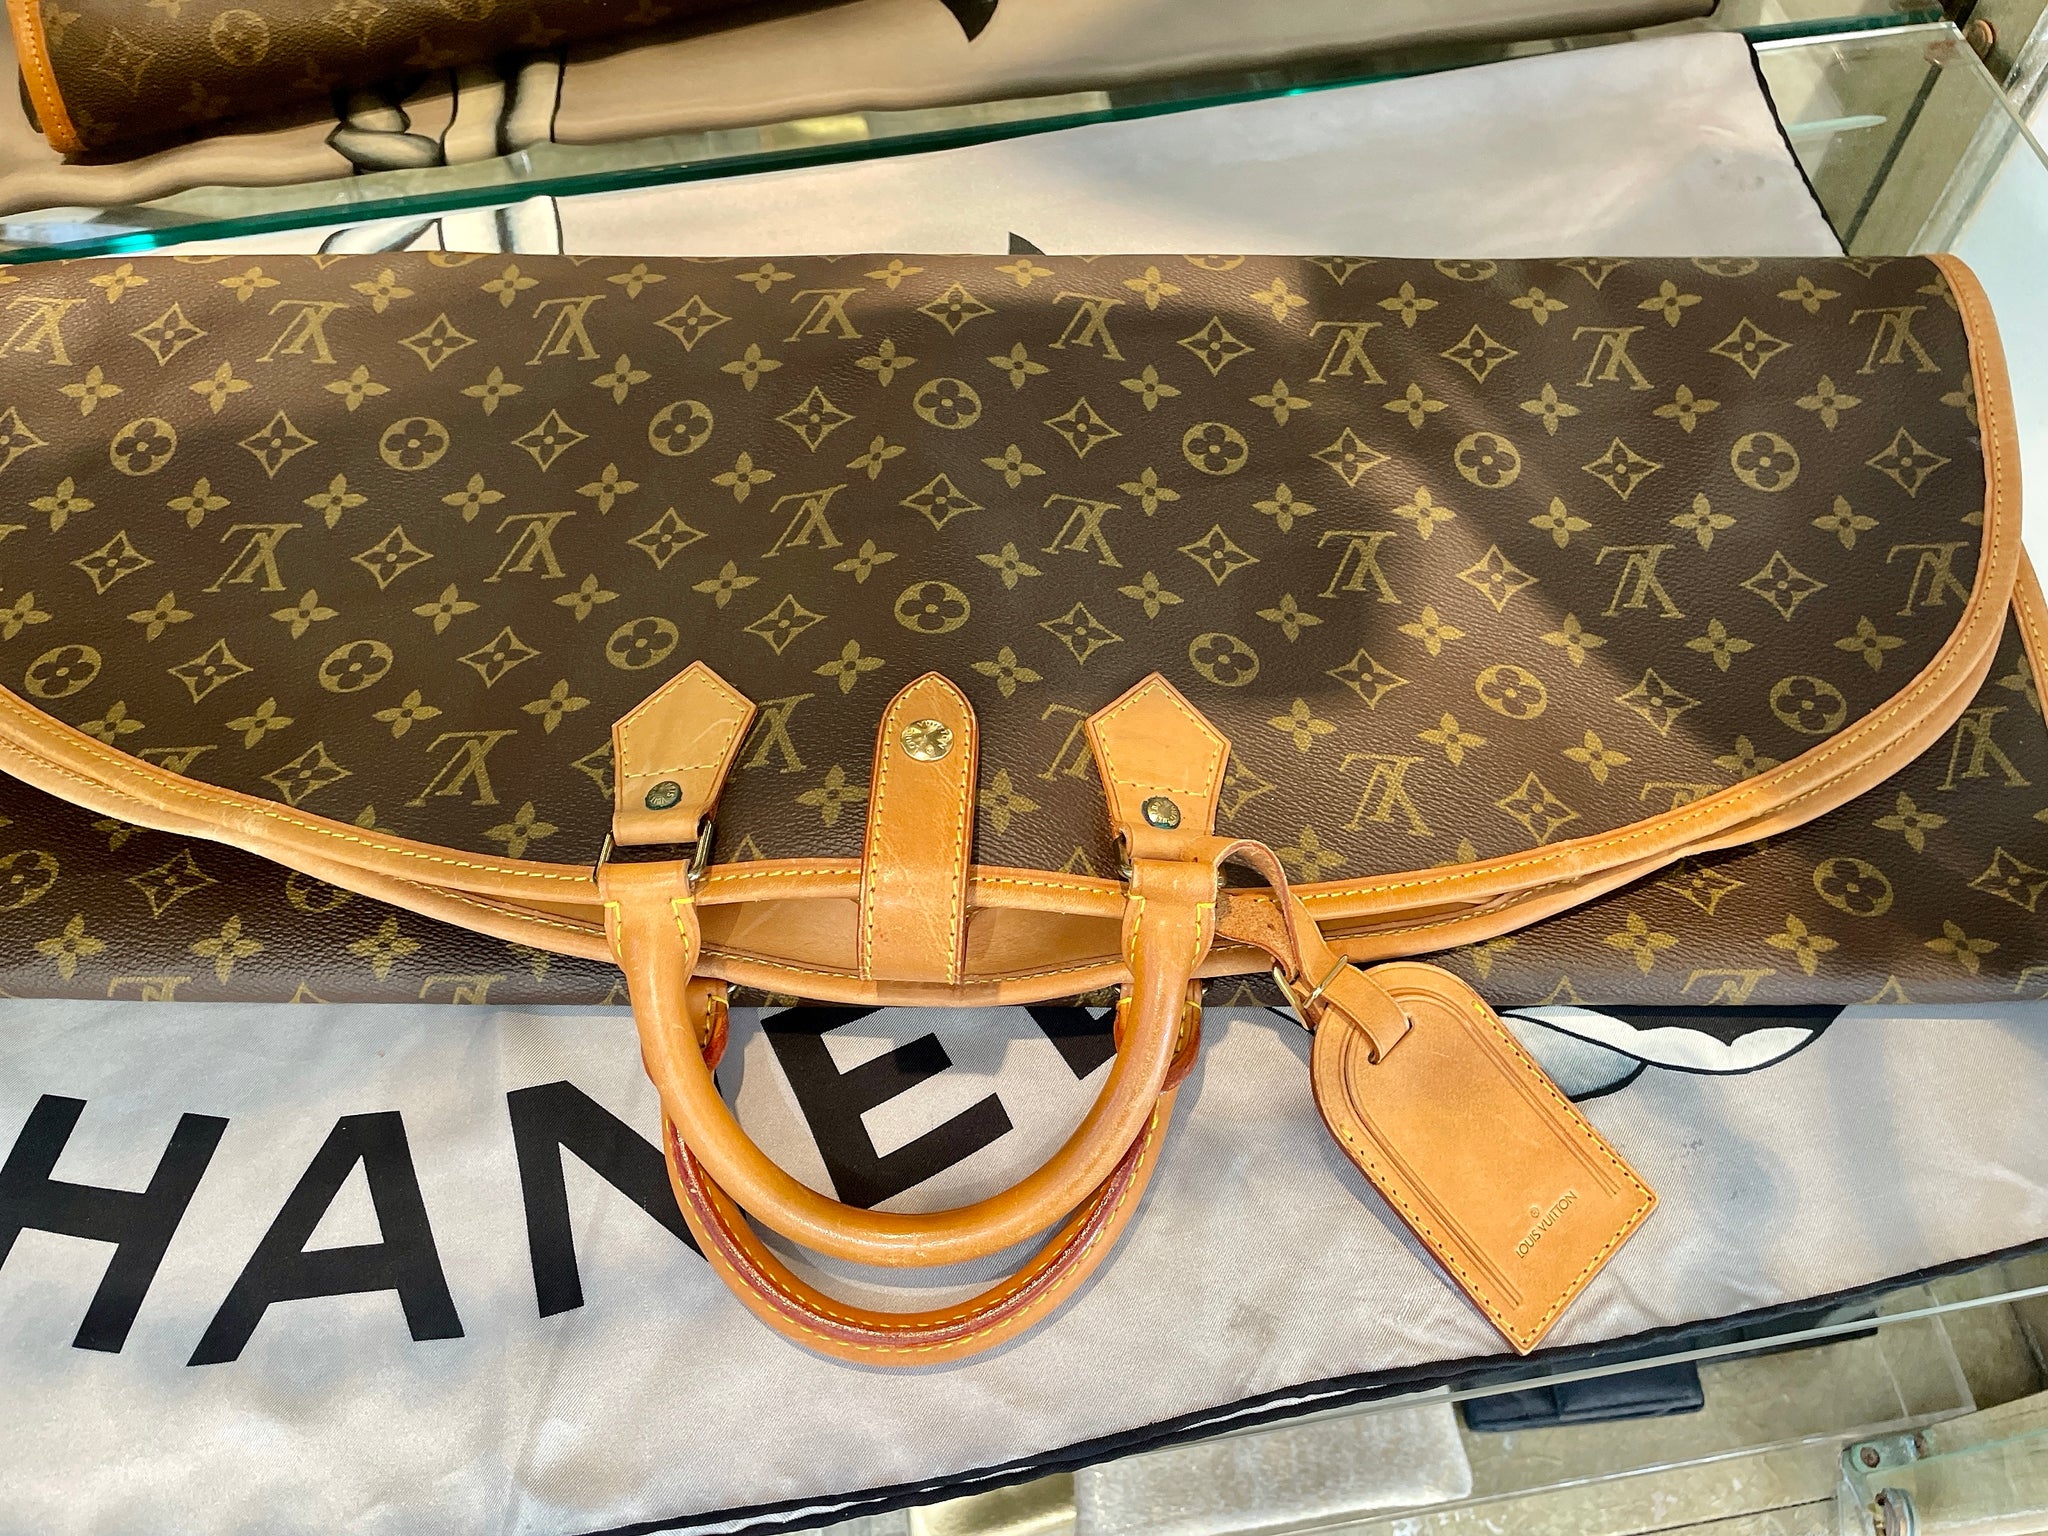 Louis vuitton, Cheap louis vuitton bags, Louis vuitton travel bags